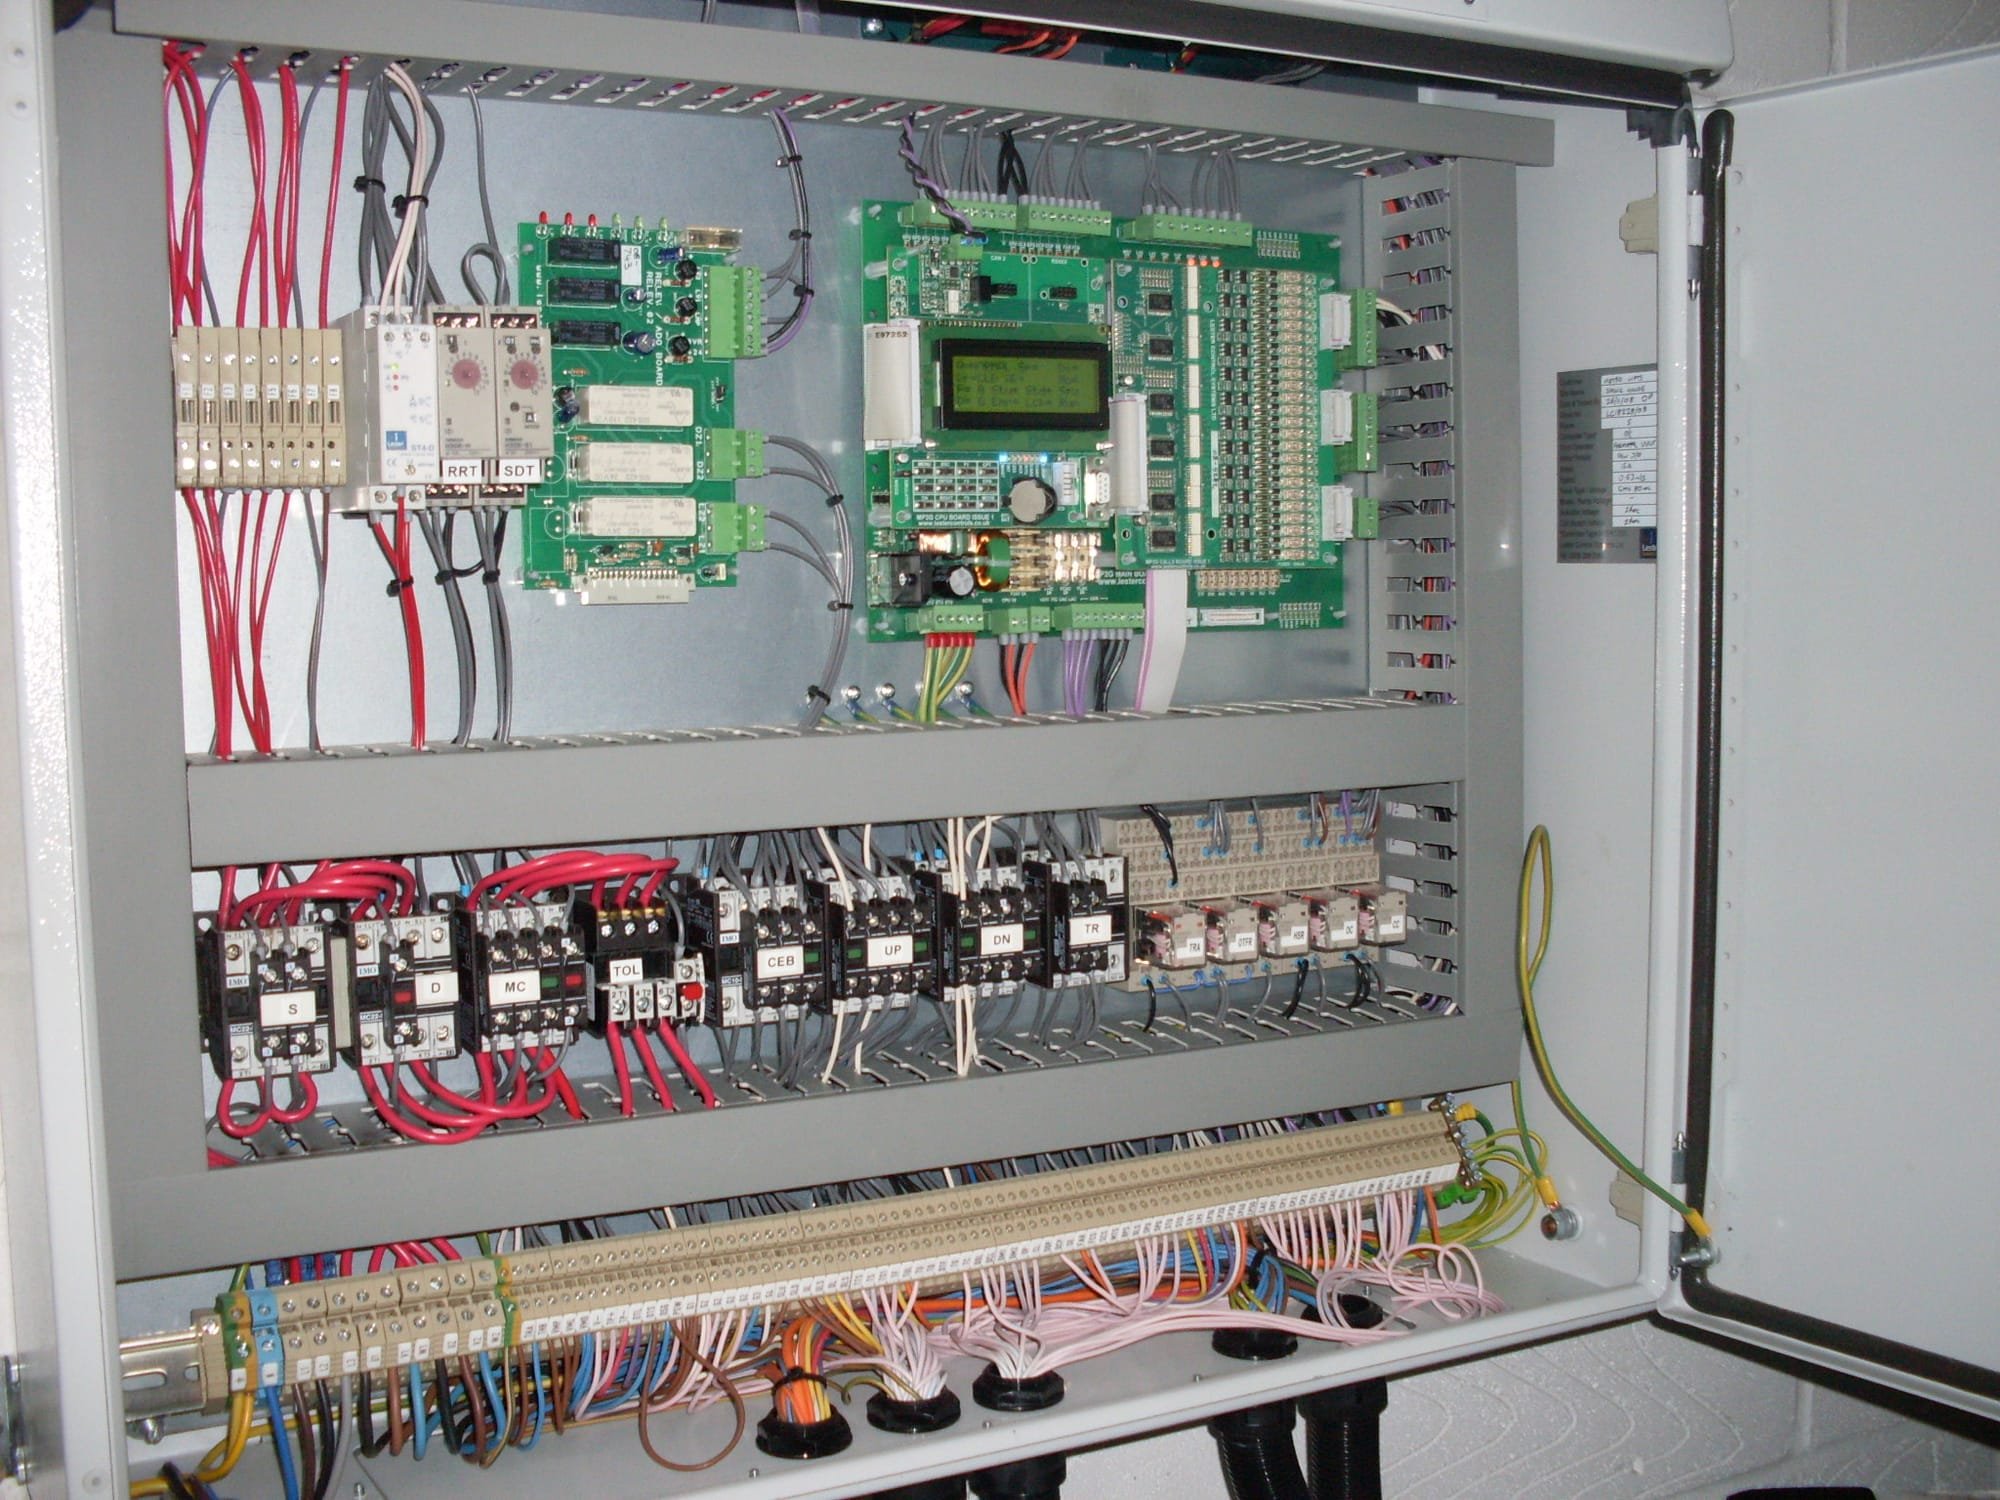 After - New modern control panel